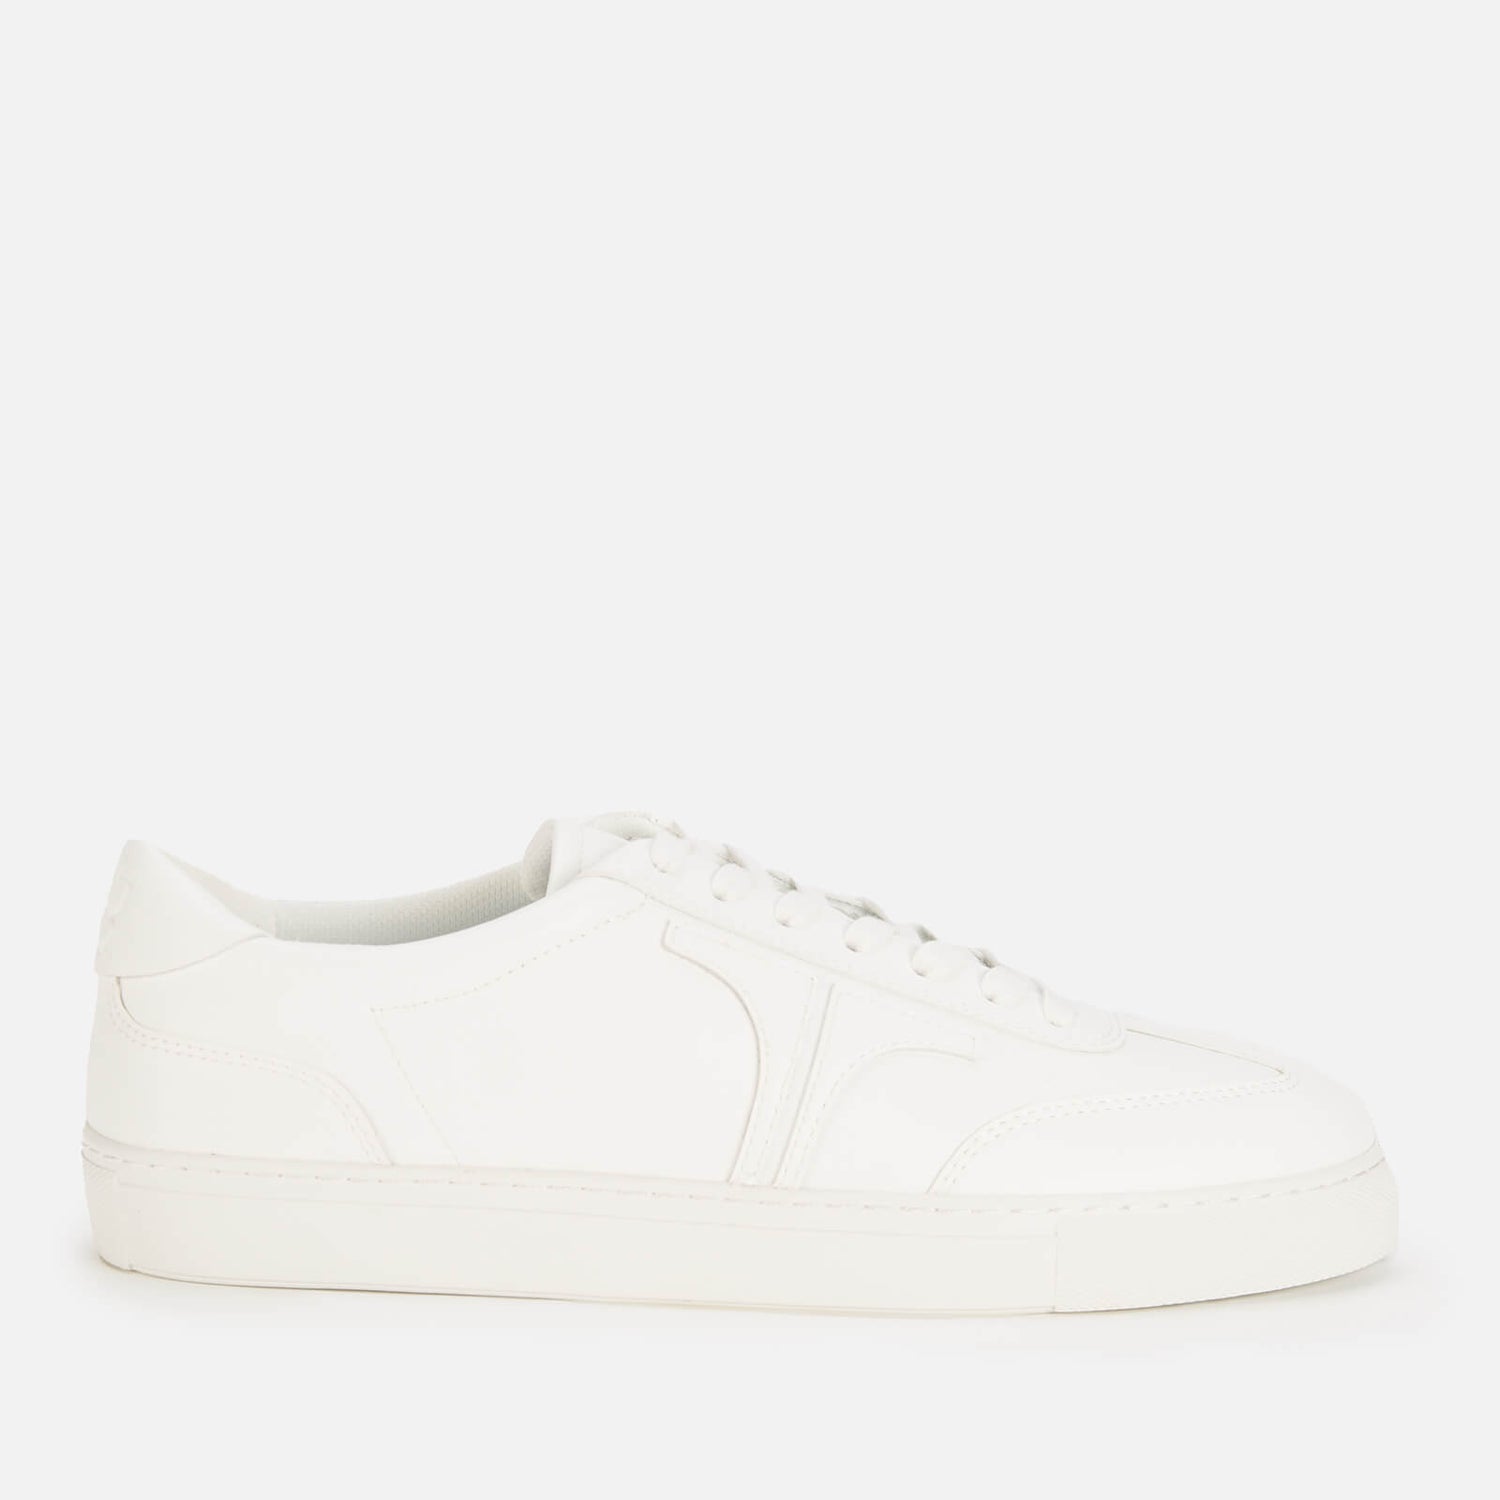 Ted Baker Men's Robbert Leather Cupsole Trainers - White - UK 7